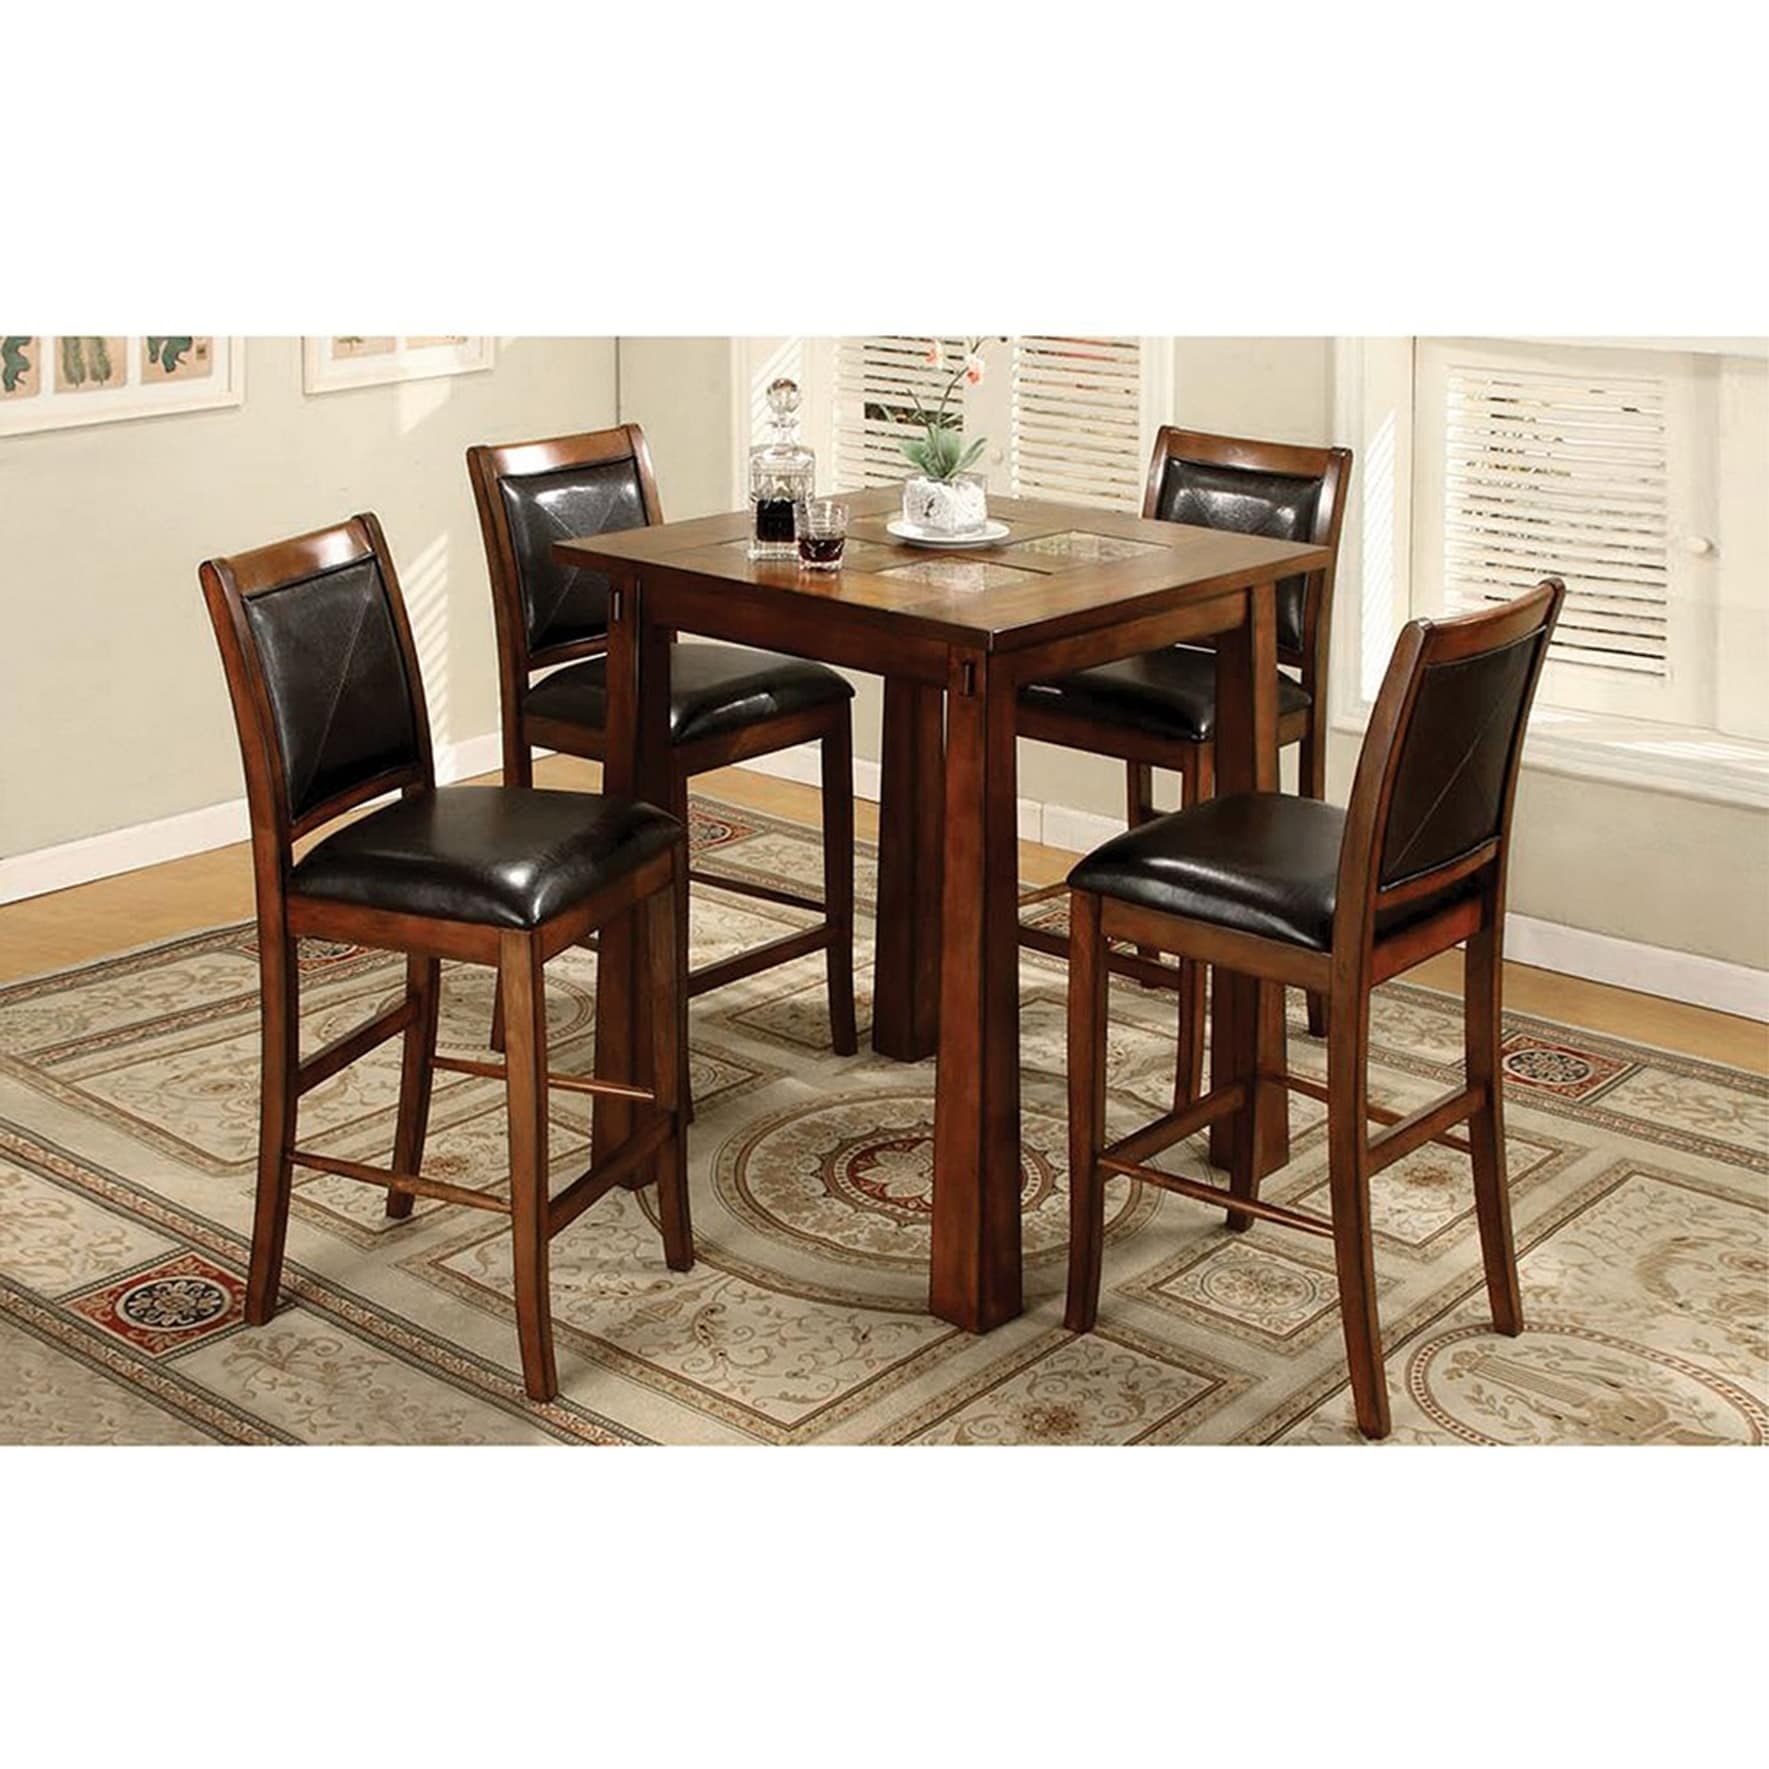 Furniture Of America Walwick Counter height Dining Chairs (set Of 2) (Wood, leatheretteChair dimensions 41.5 inches high x 22.5 inches wide x 19 inches longAvoid placing your furniture in direct sunlight and maintain at least two feet between furniture a